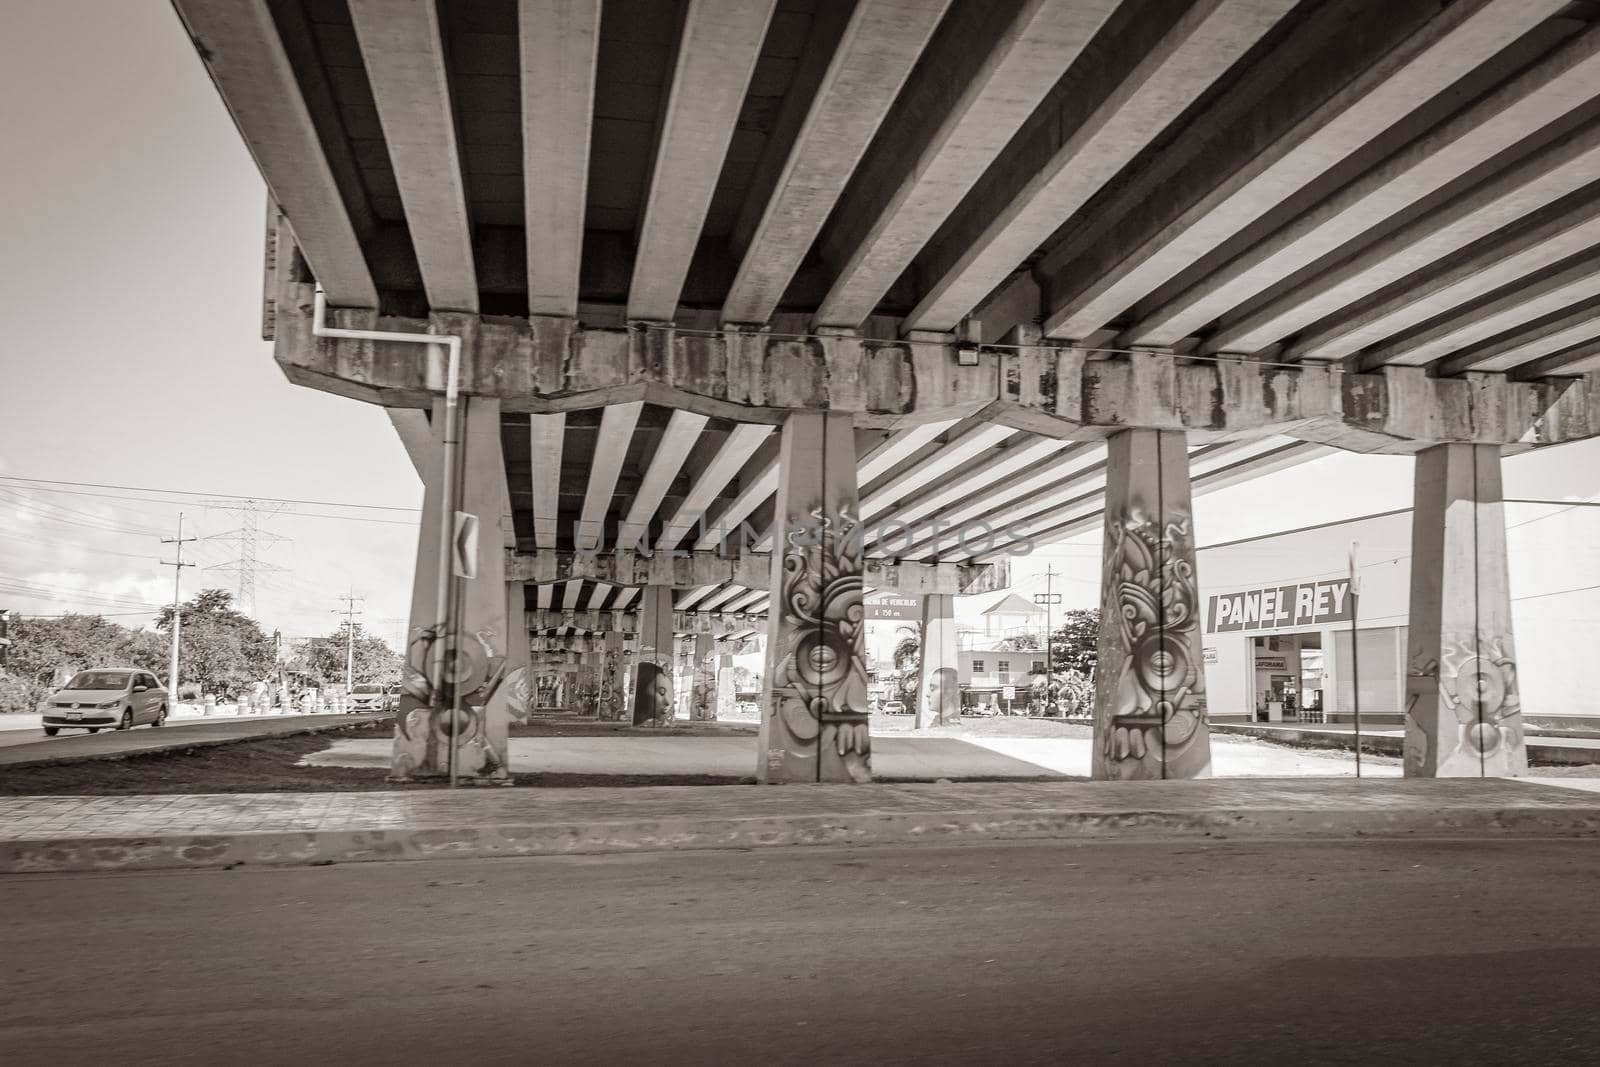 Playa del Carmen Mexico 04. February 2022 Old black and white picture of typical Highway Freeway bridge and street road and cityscape with cars buildings of Playa del Carmen in Mexico.